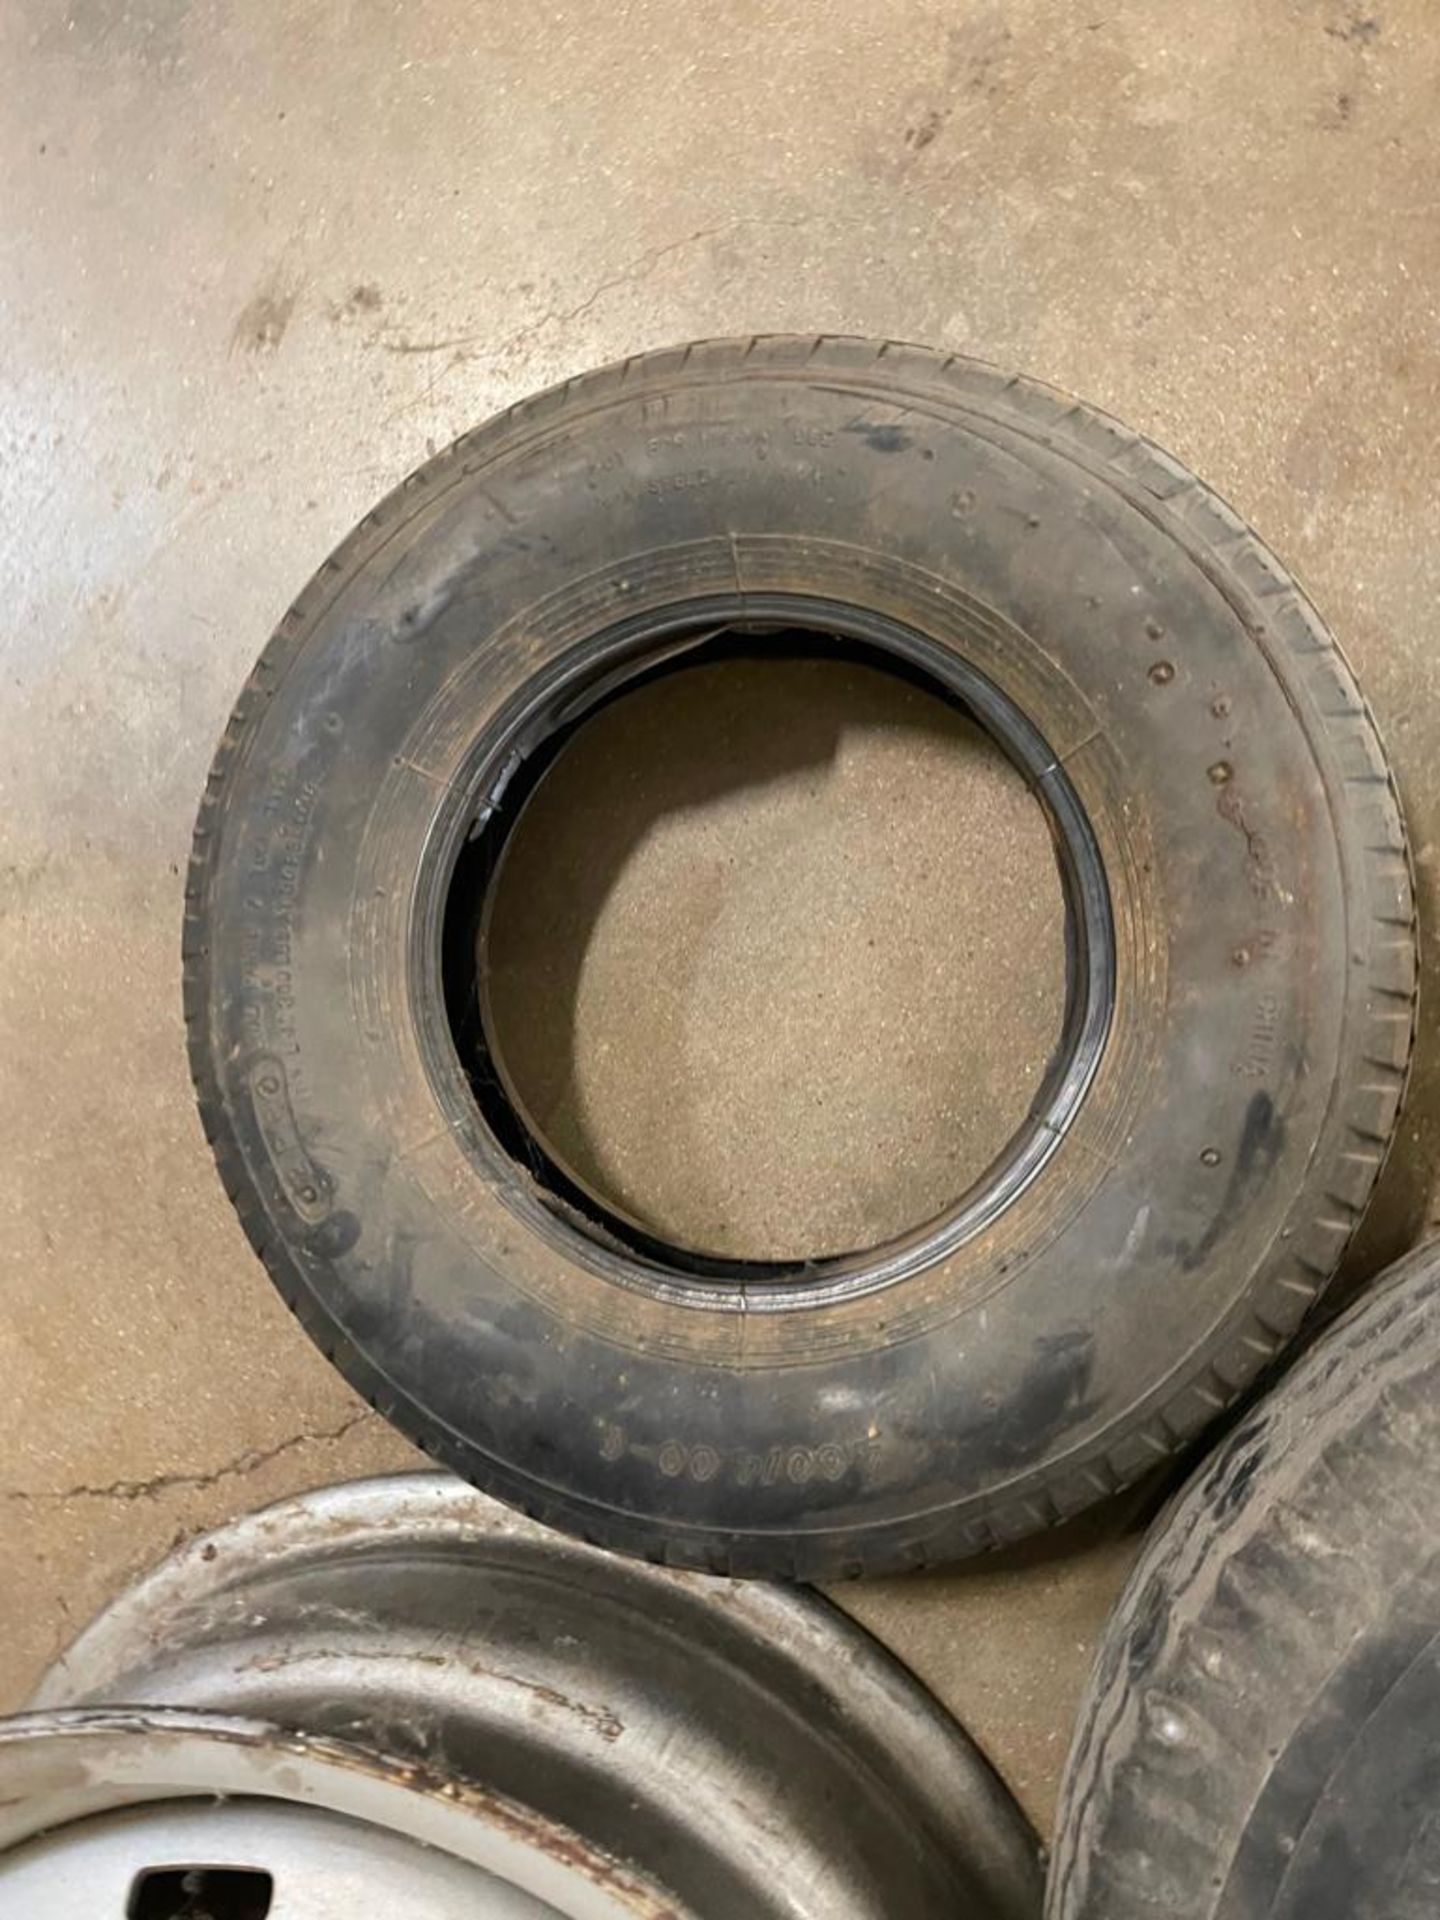 Tire 4.80/4.00-8, 6 Bolt Rim & Tire 5.30-12 with 5 Bolt Rim. Located in Hazelwood, MO - Image 5 of 9